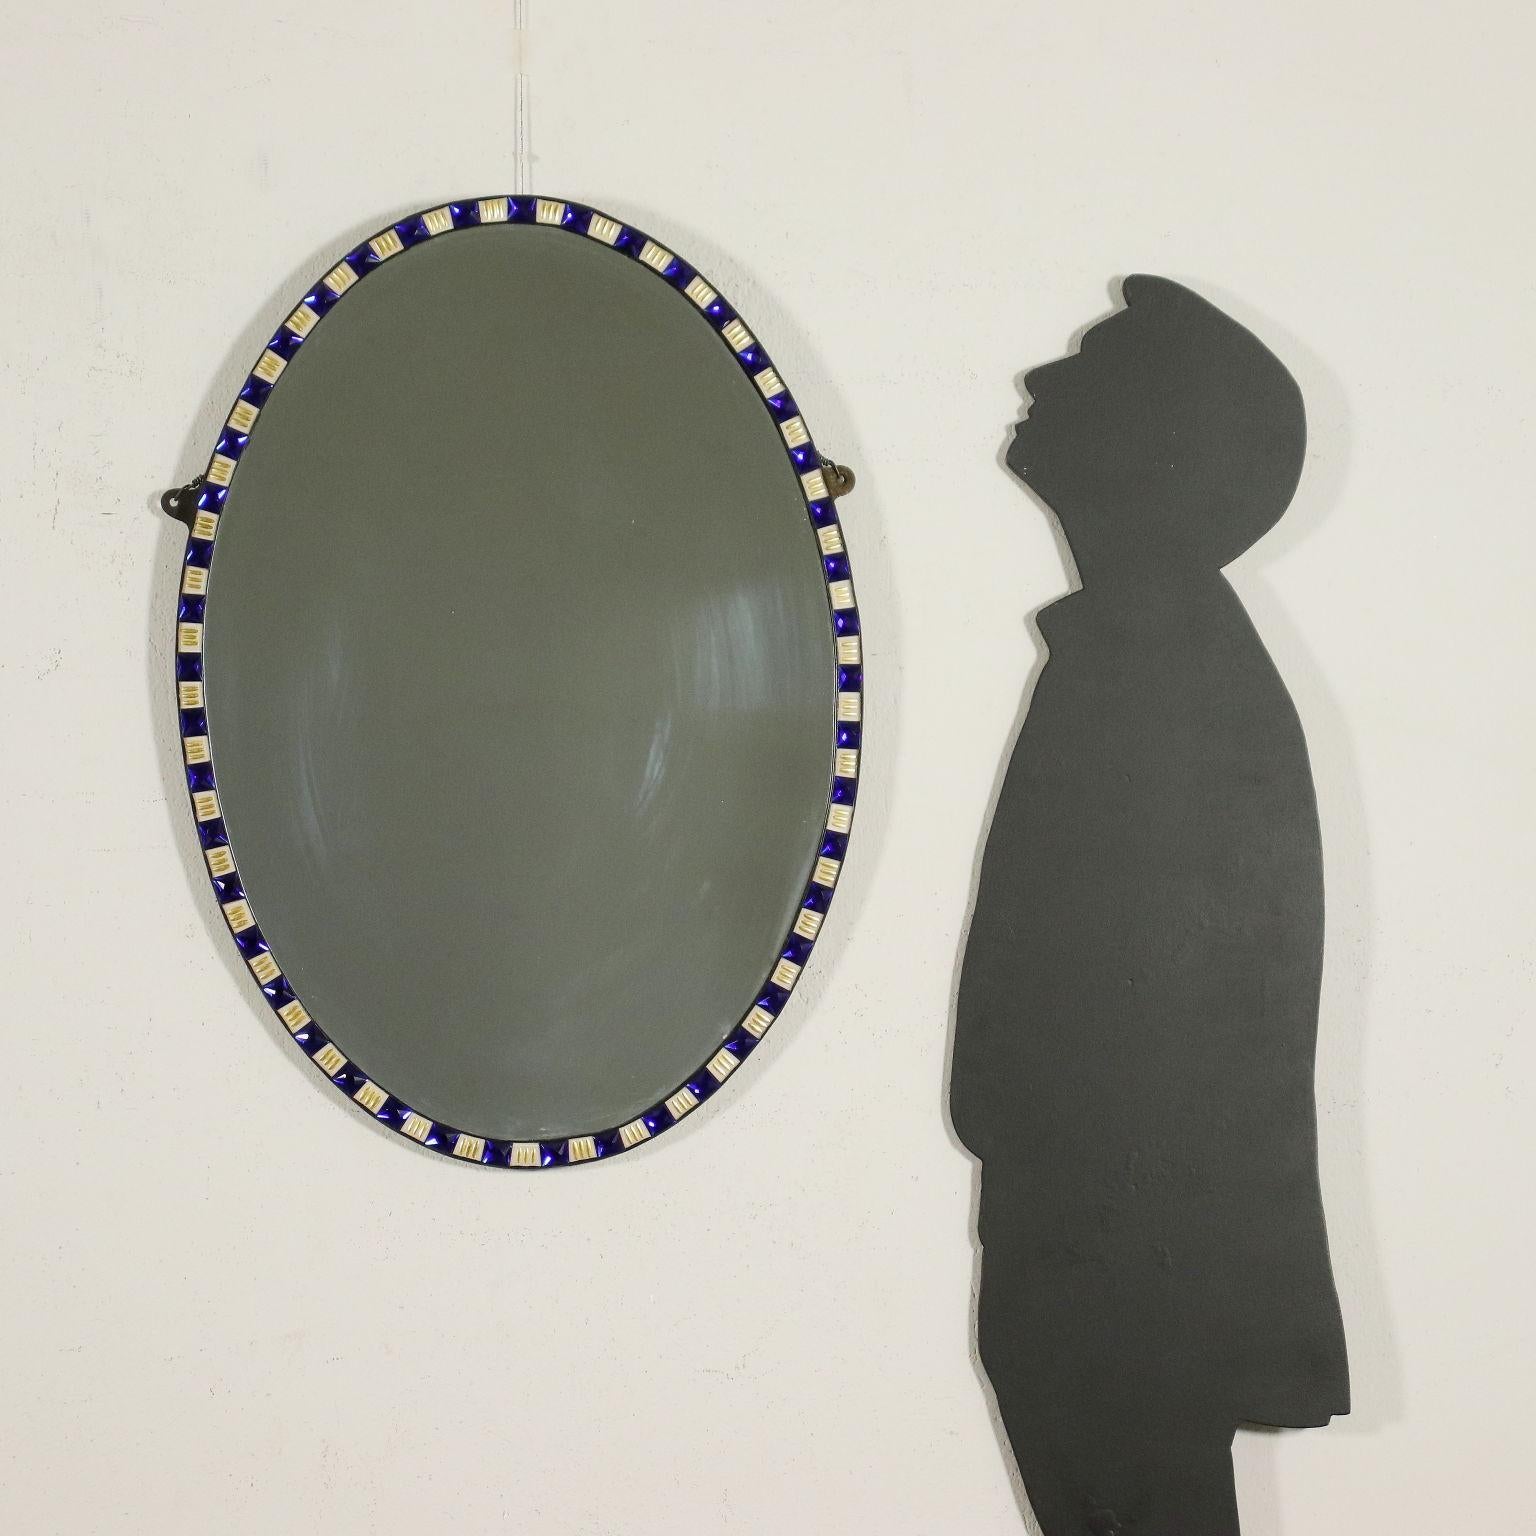 Pair of oval Irish mirrors, the frame is made up of alternating tiles in ground blue glass and transparent glass, with three grindings finished in gold leaf and white enamelled on the back.